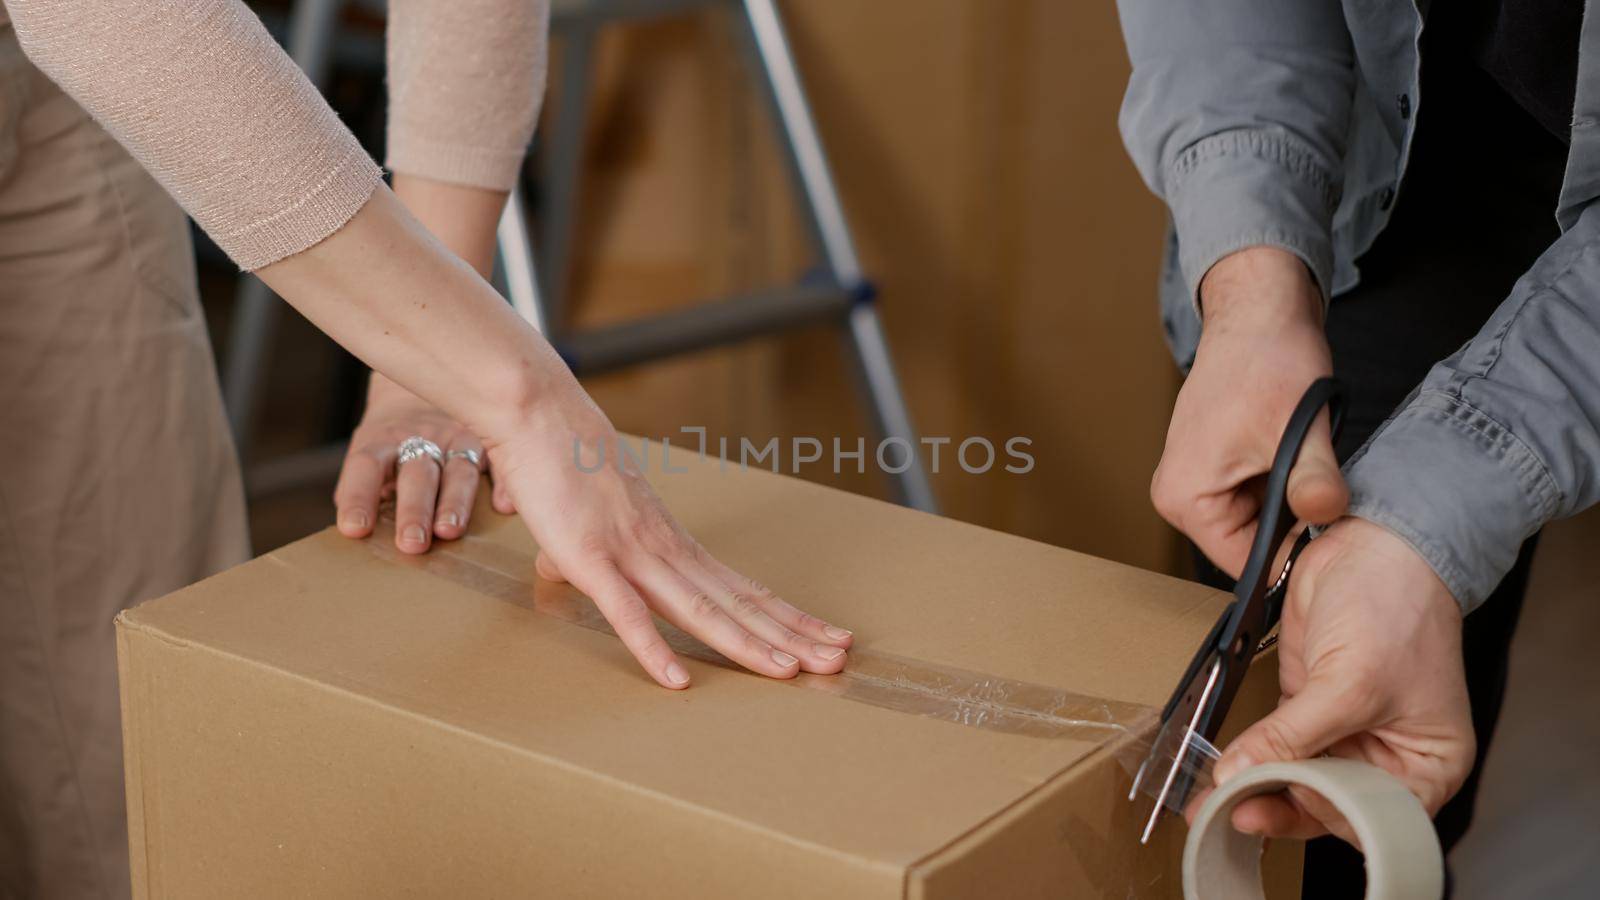 Couple using adhesive tape to pack things in cardboard boxes, wrapping carton storage containers with sticky roller. Preparing packages for shipping transportation to move in. Close up.